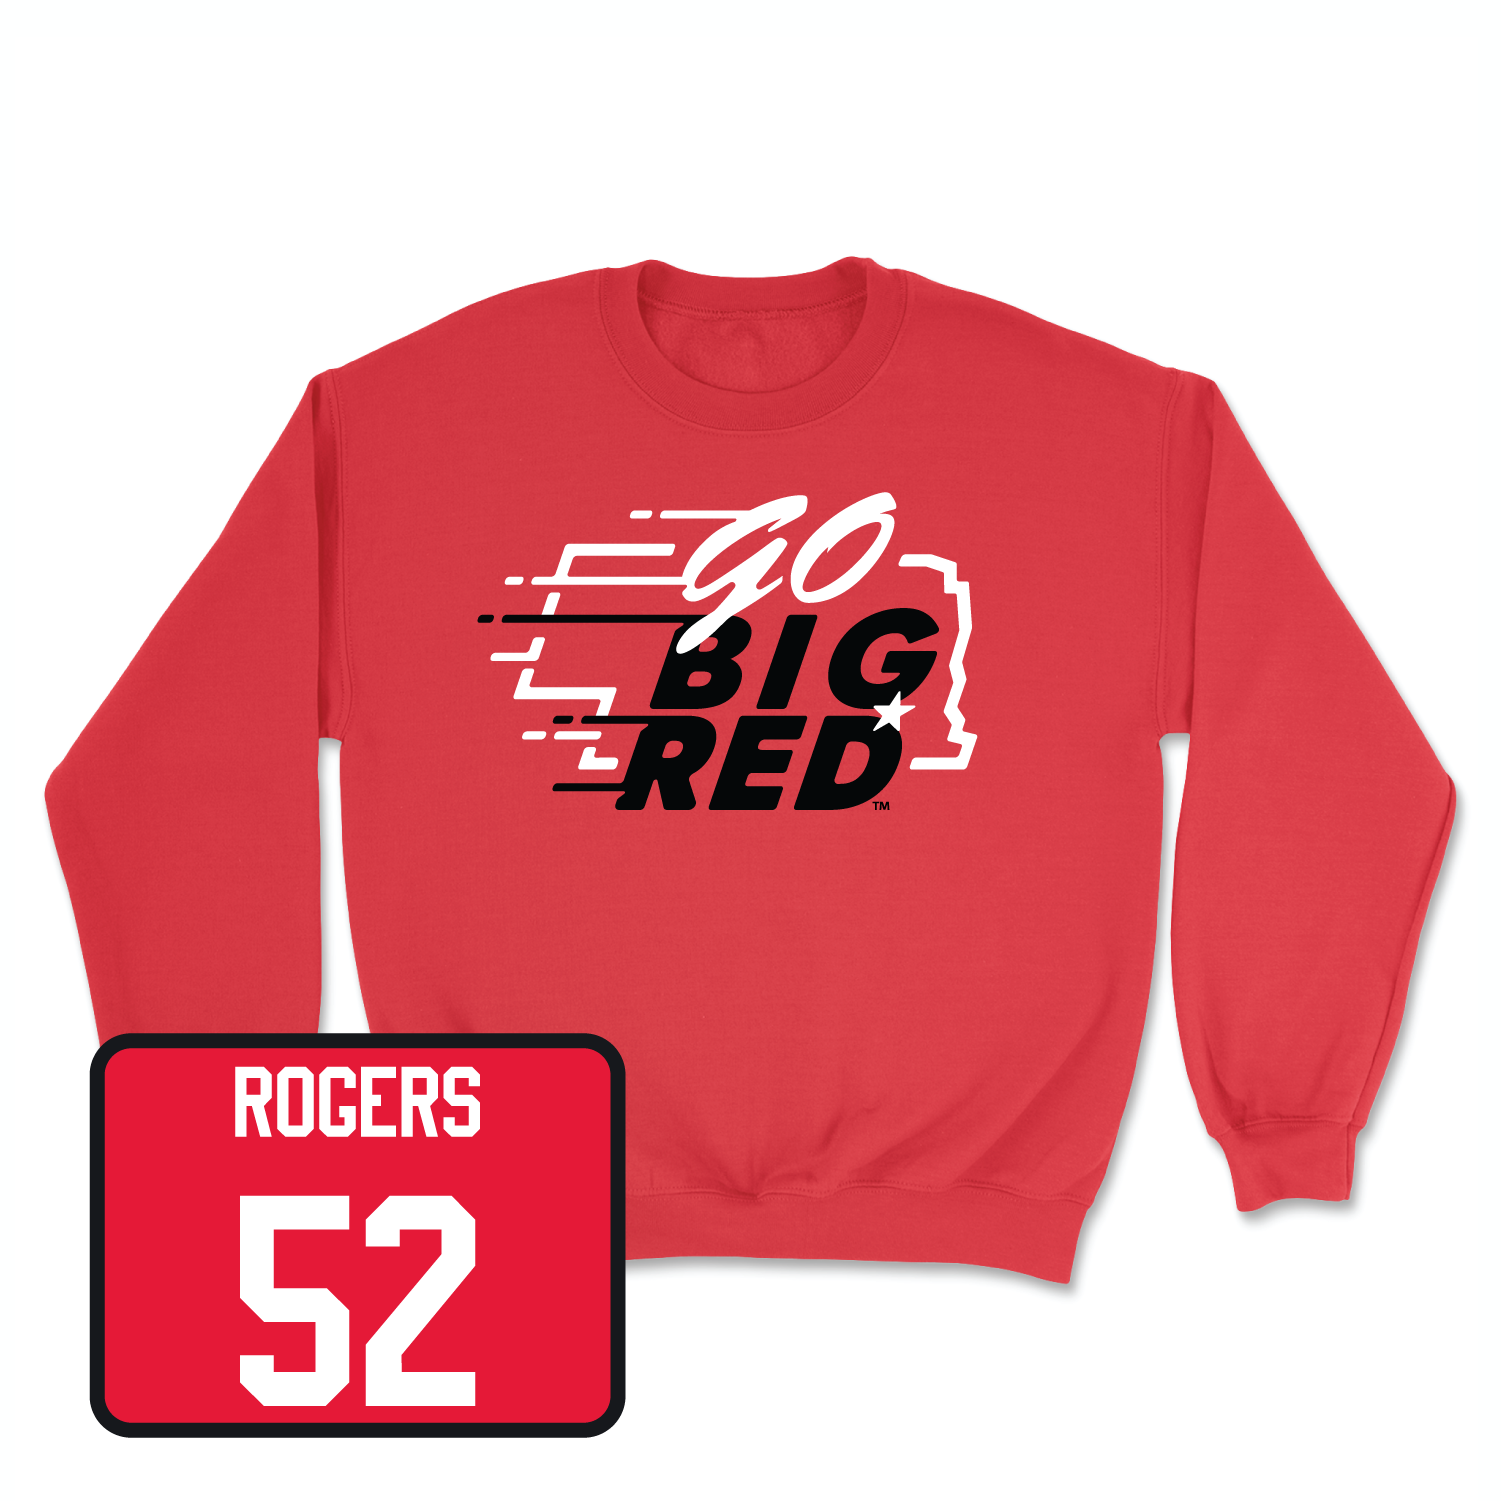 Red Football GBR Crew Youth Medium / Dylan Rogers | #52